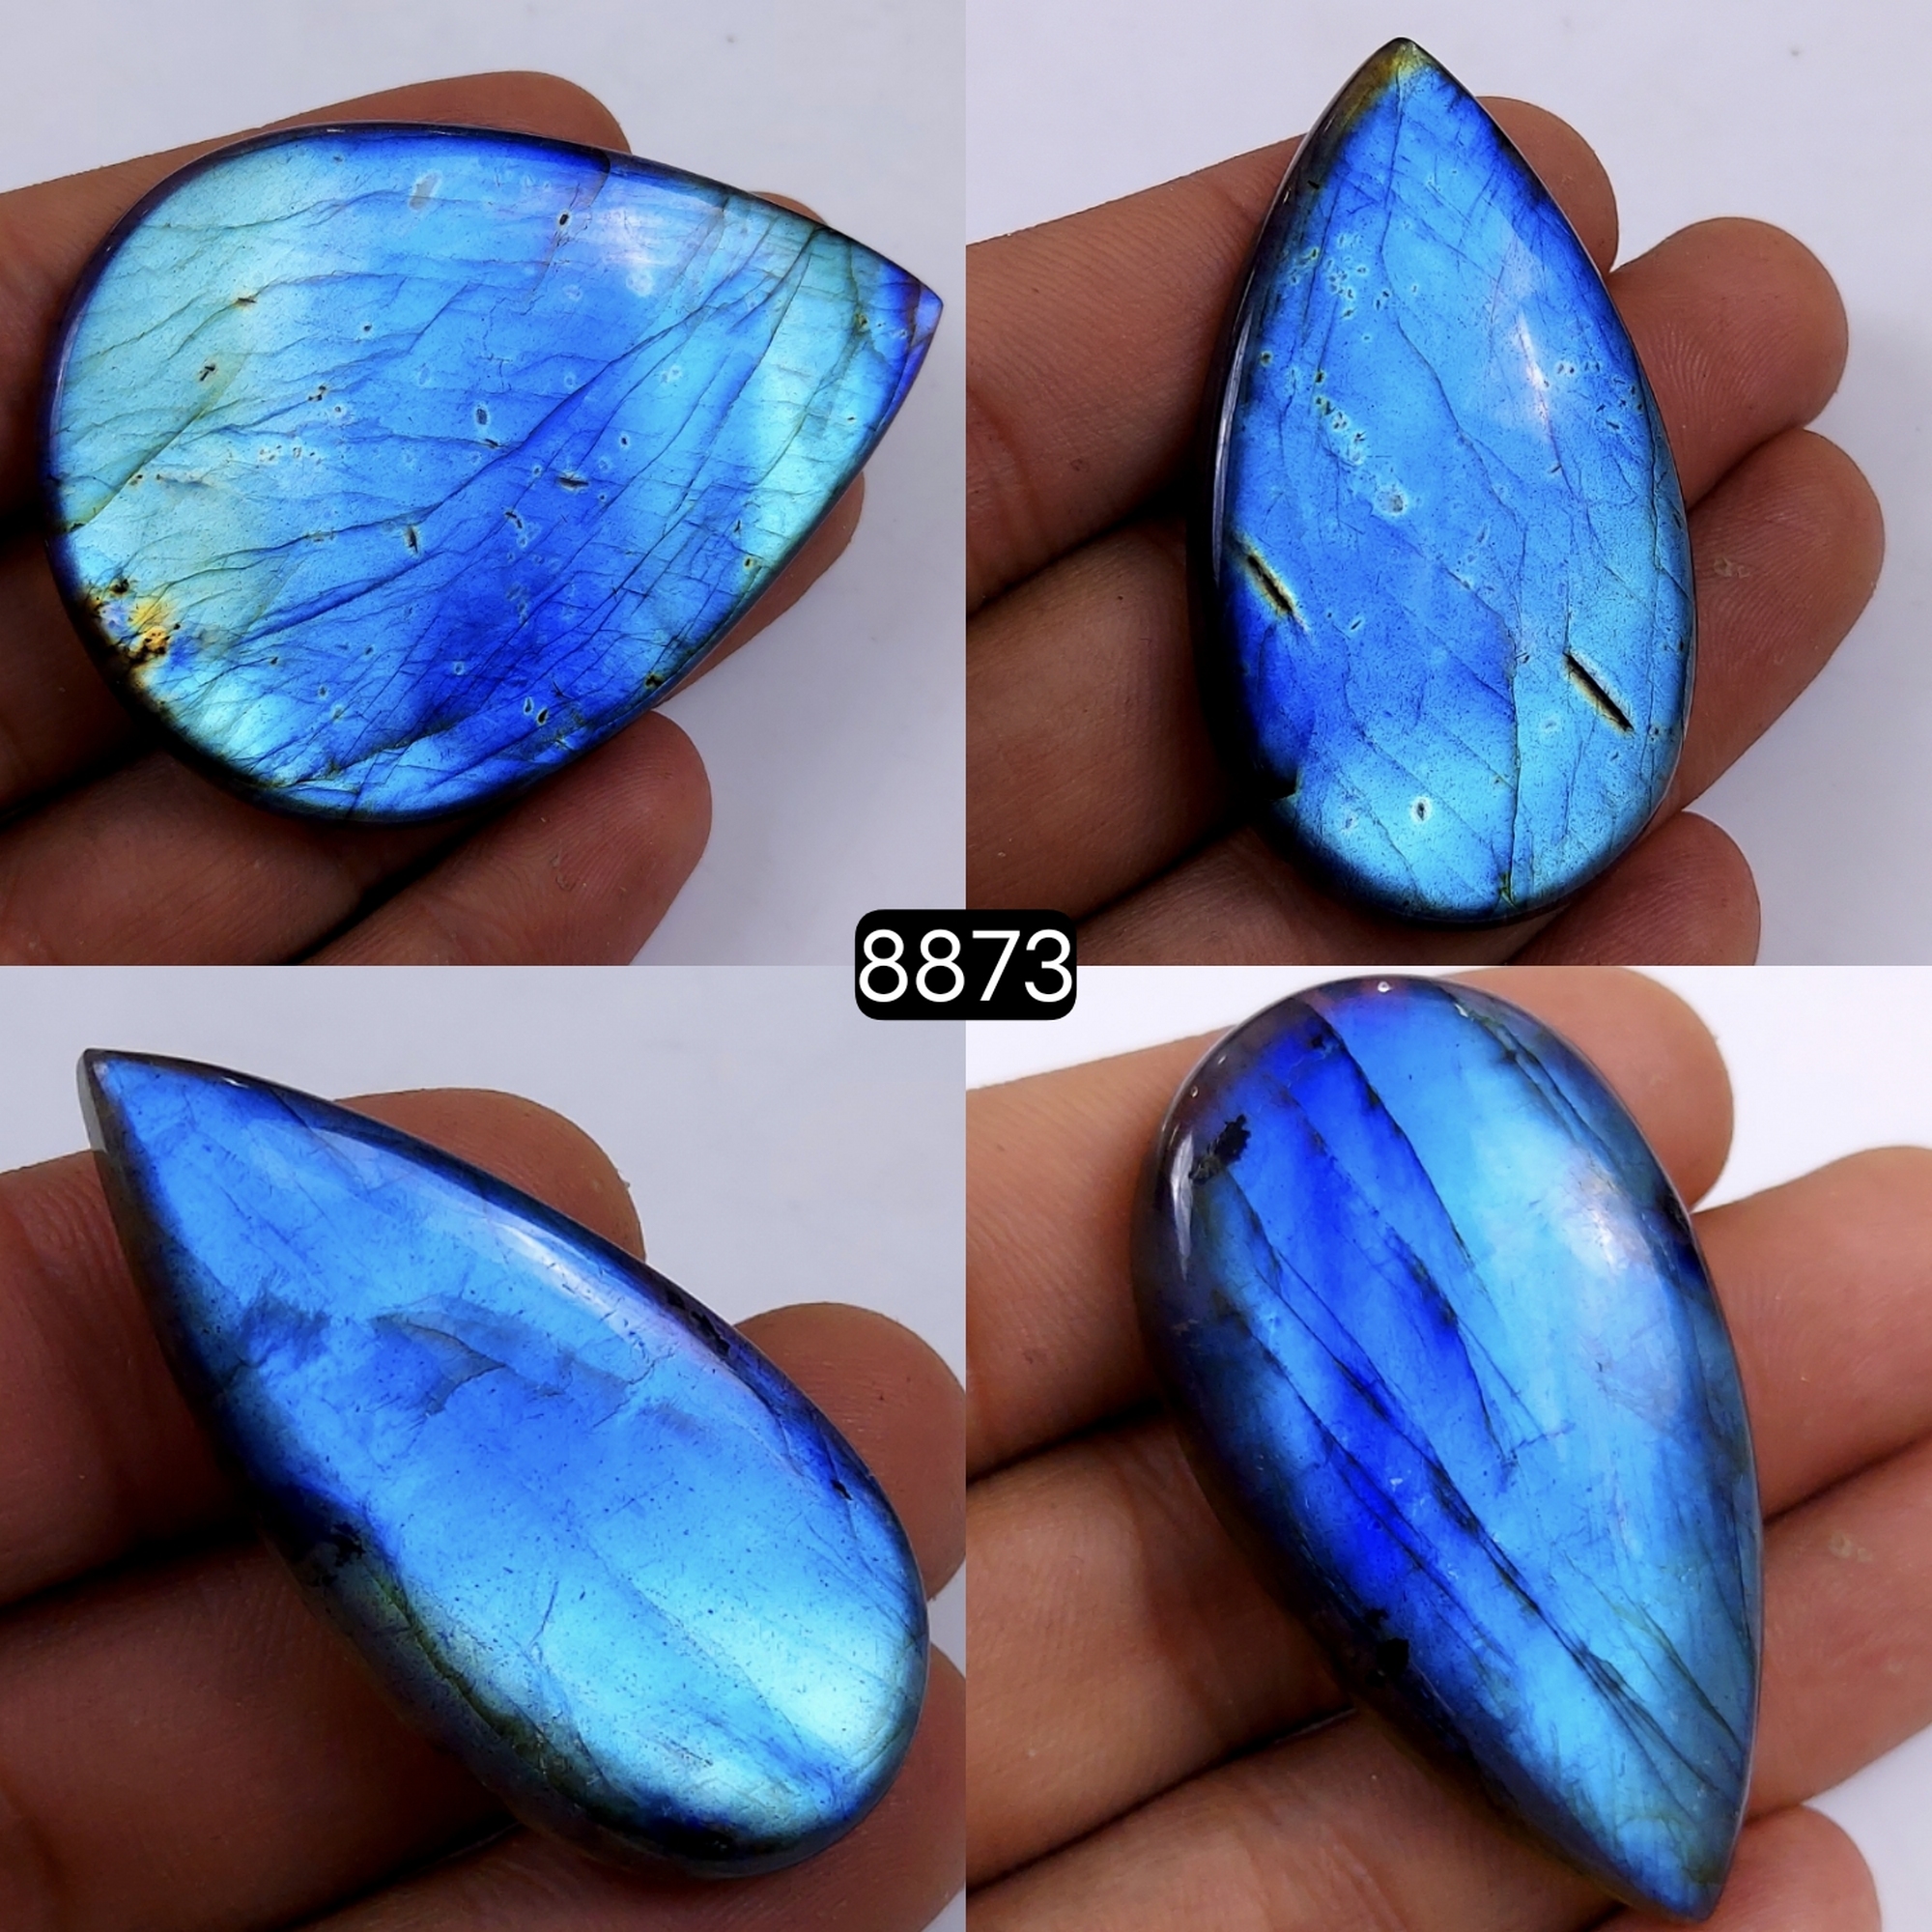 4Pcs 393Cts  Natural Labradorite Pear Shape Loose Gemstone Cabochon Lot For Jewelry Making 66x44 44x18mm#8873